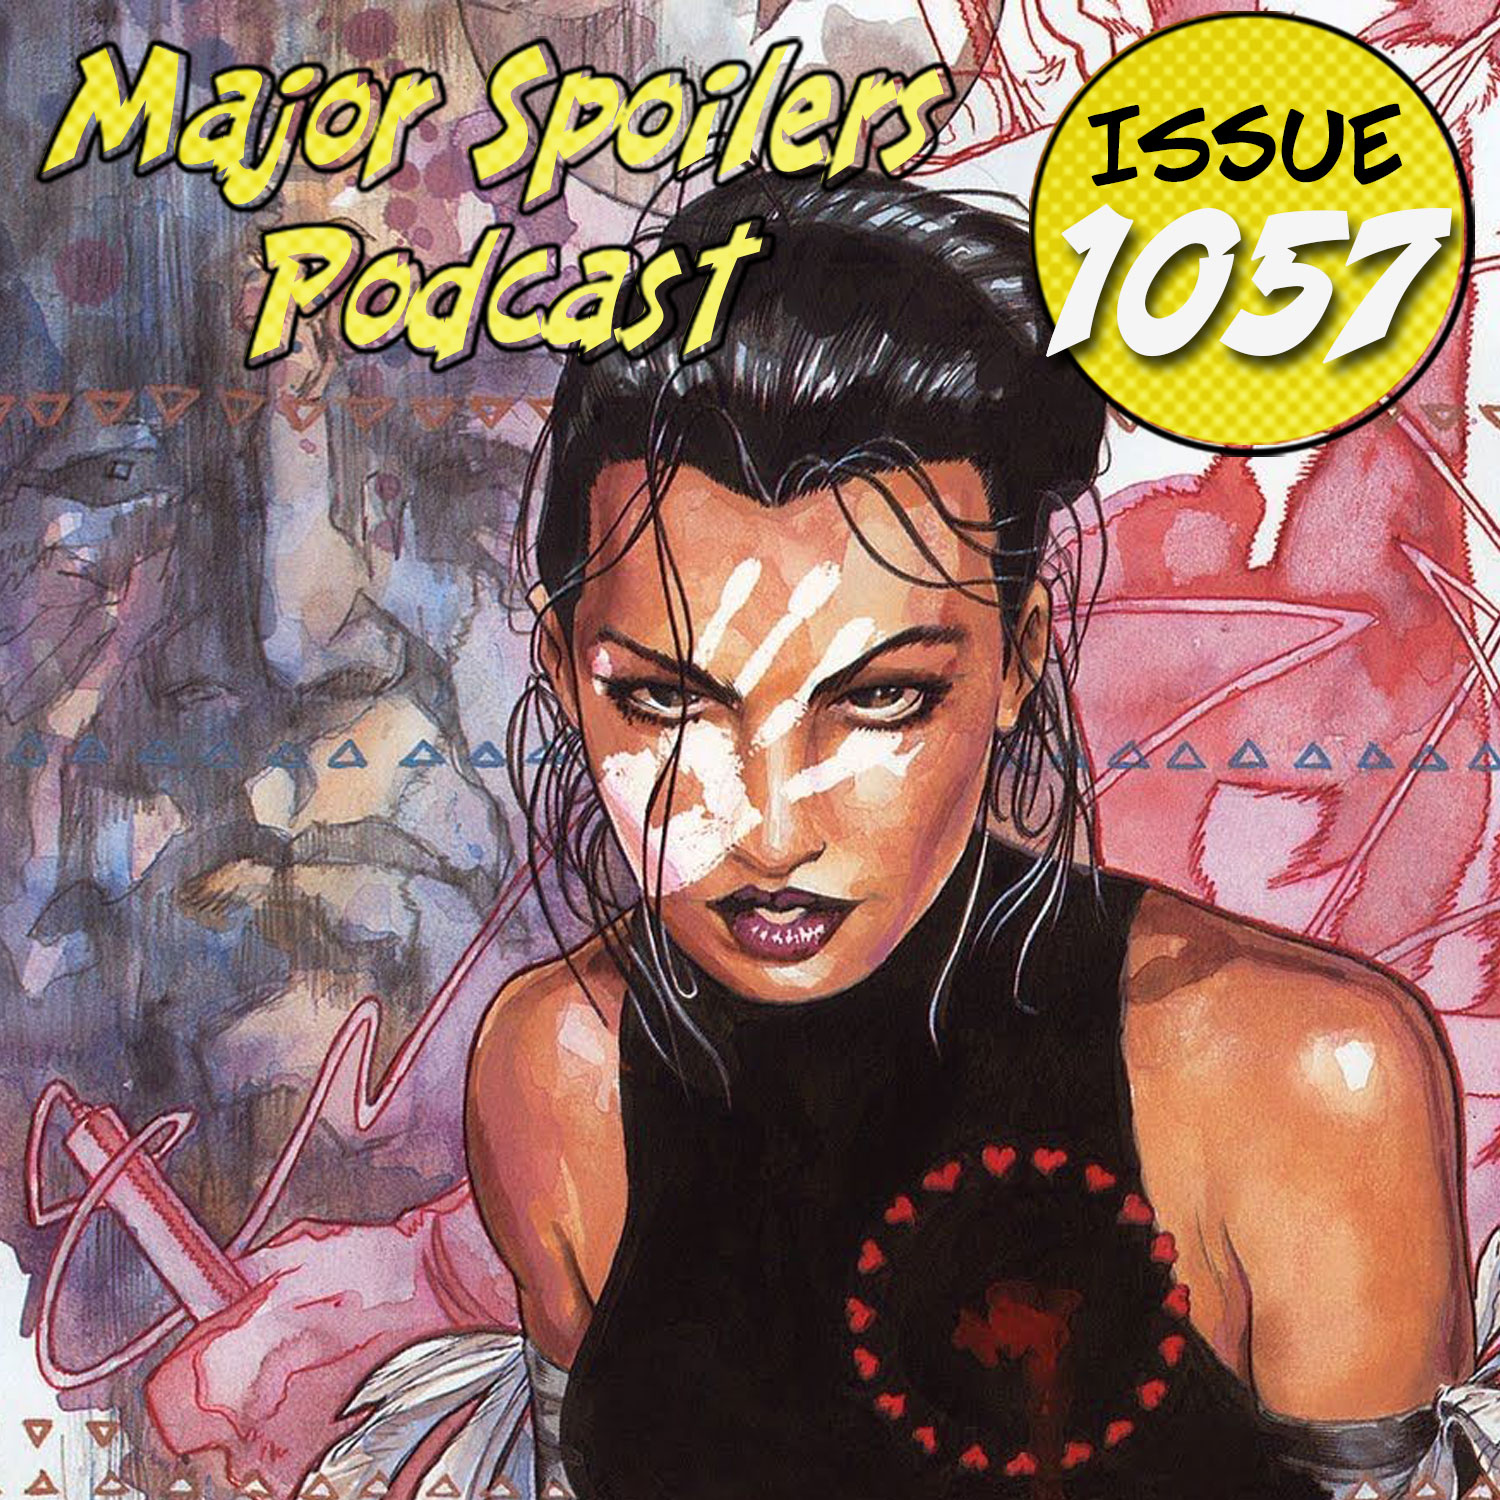 Major Spoilers Podcast #1057: The Echo Podcast